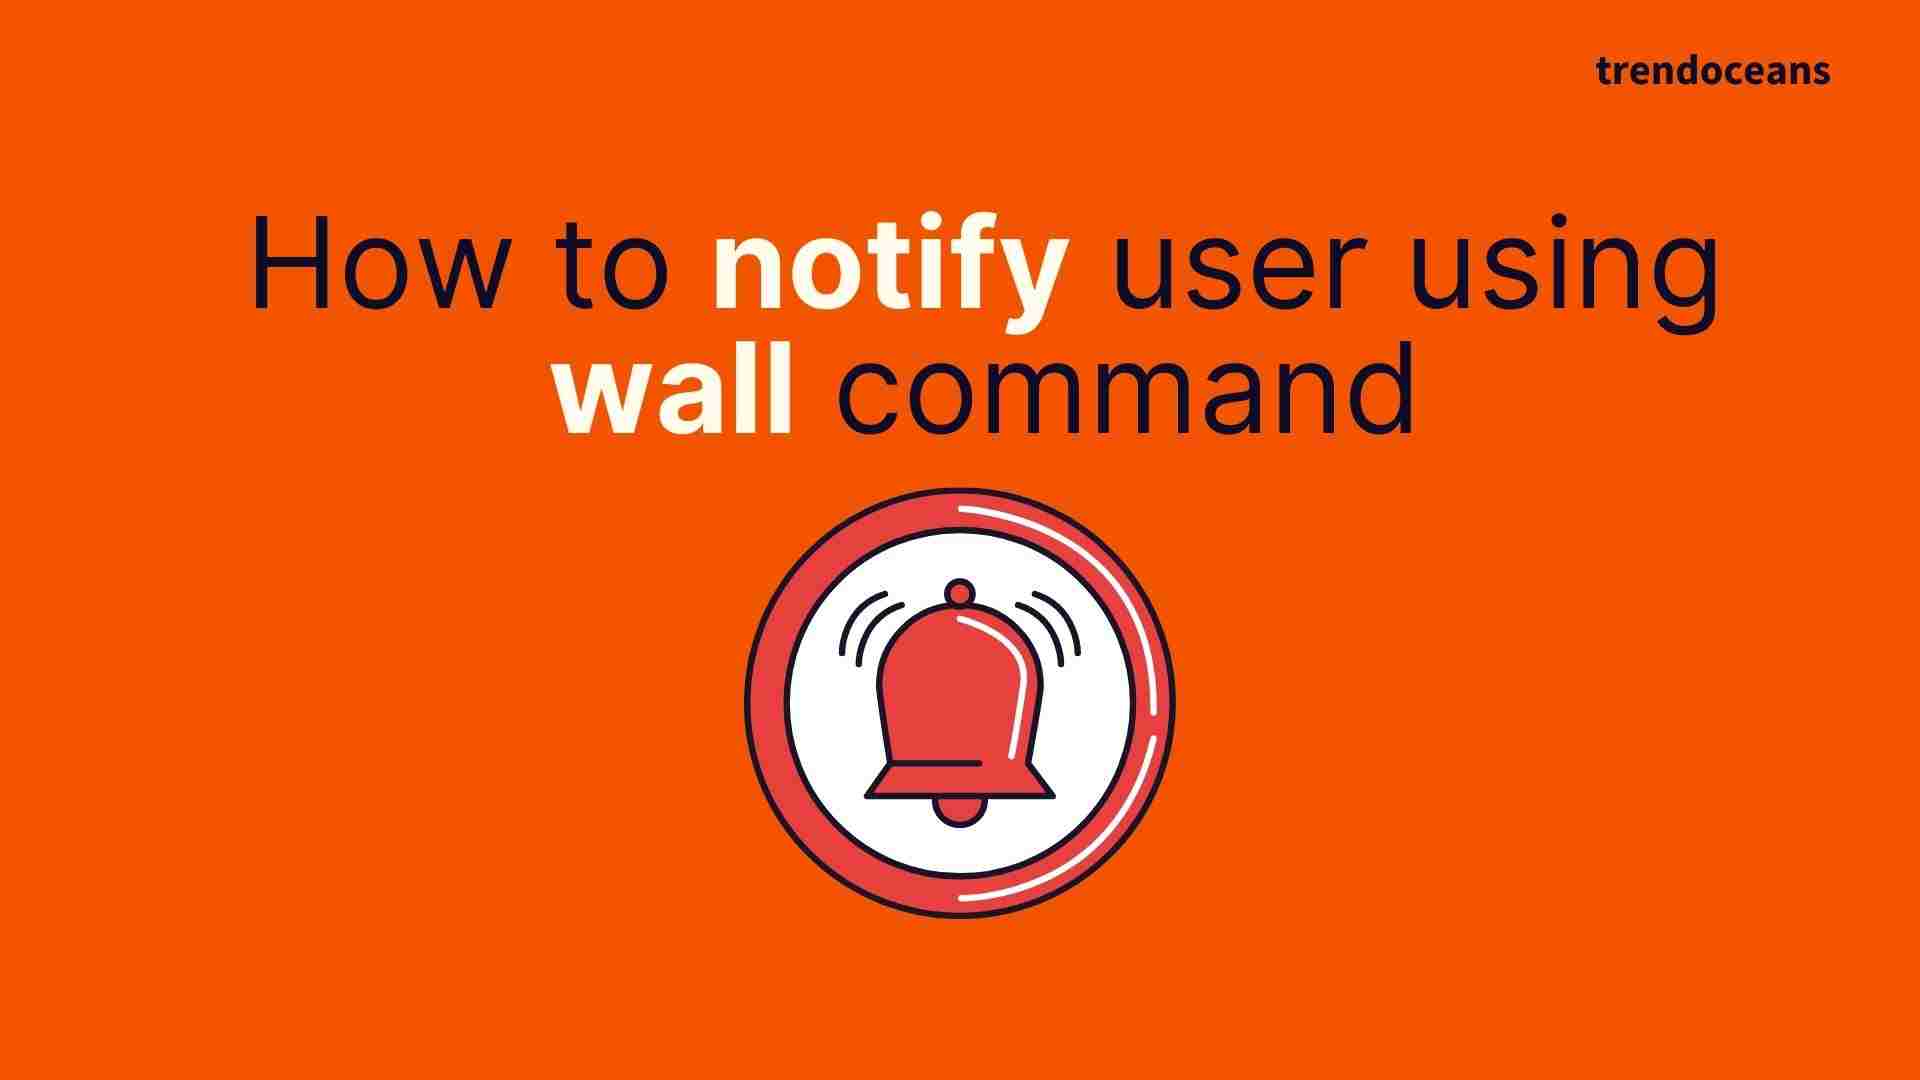 How to notify user using wall command